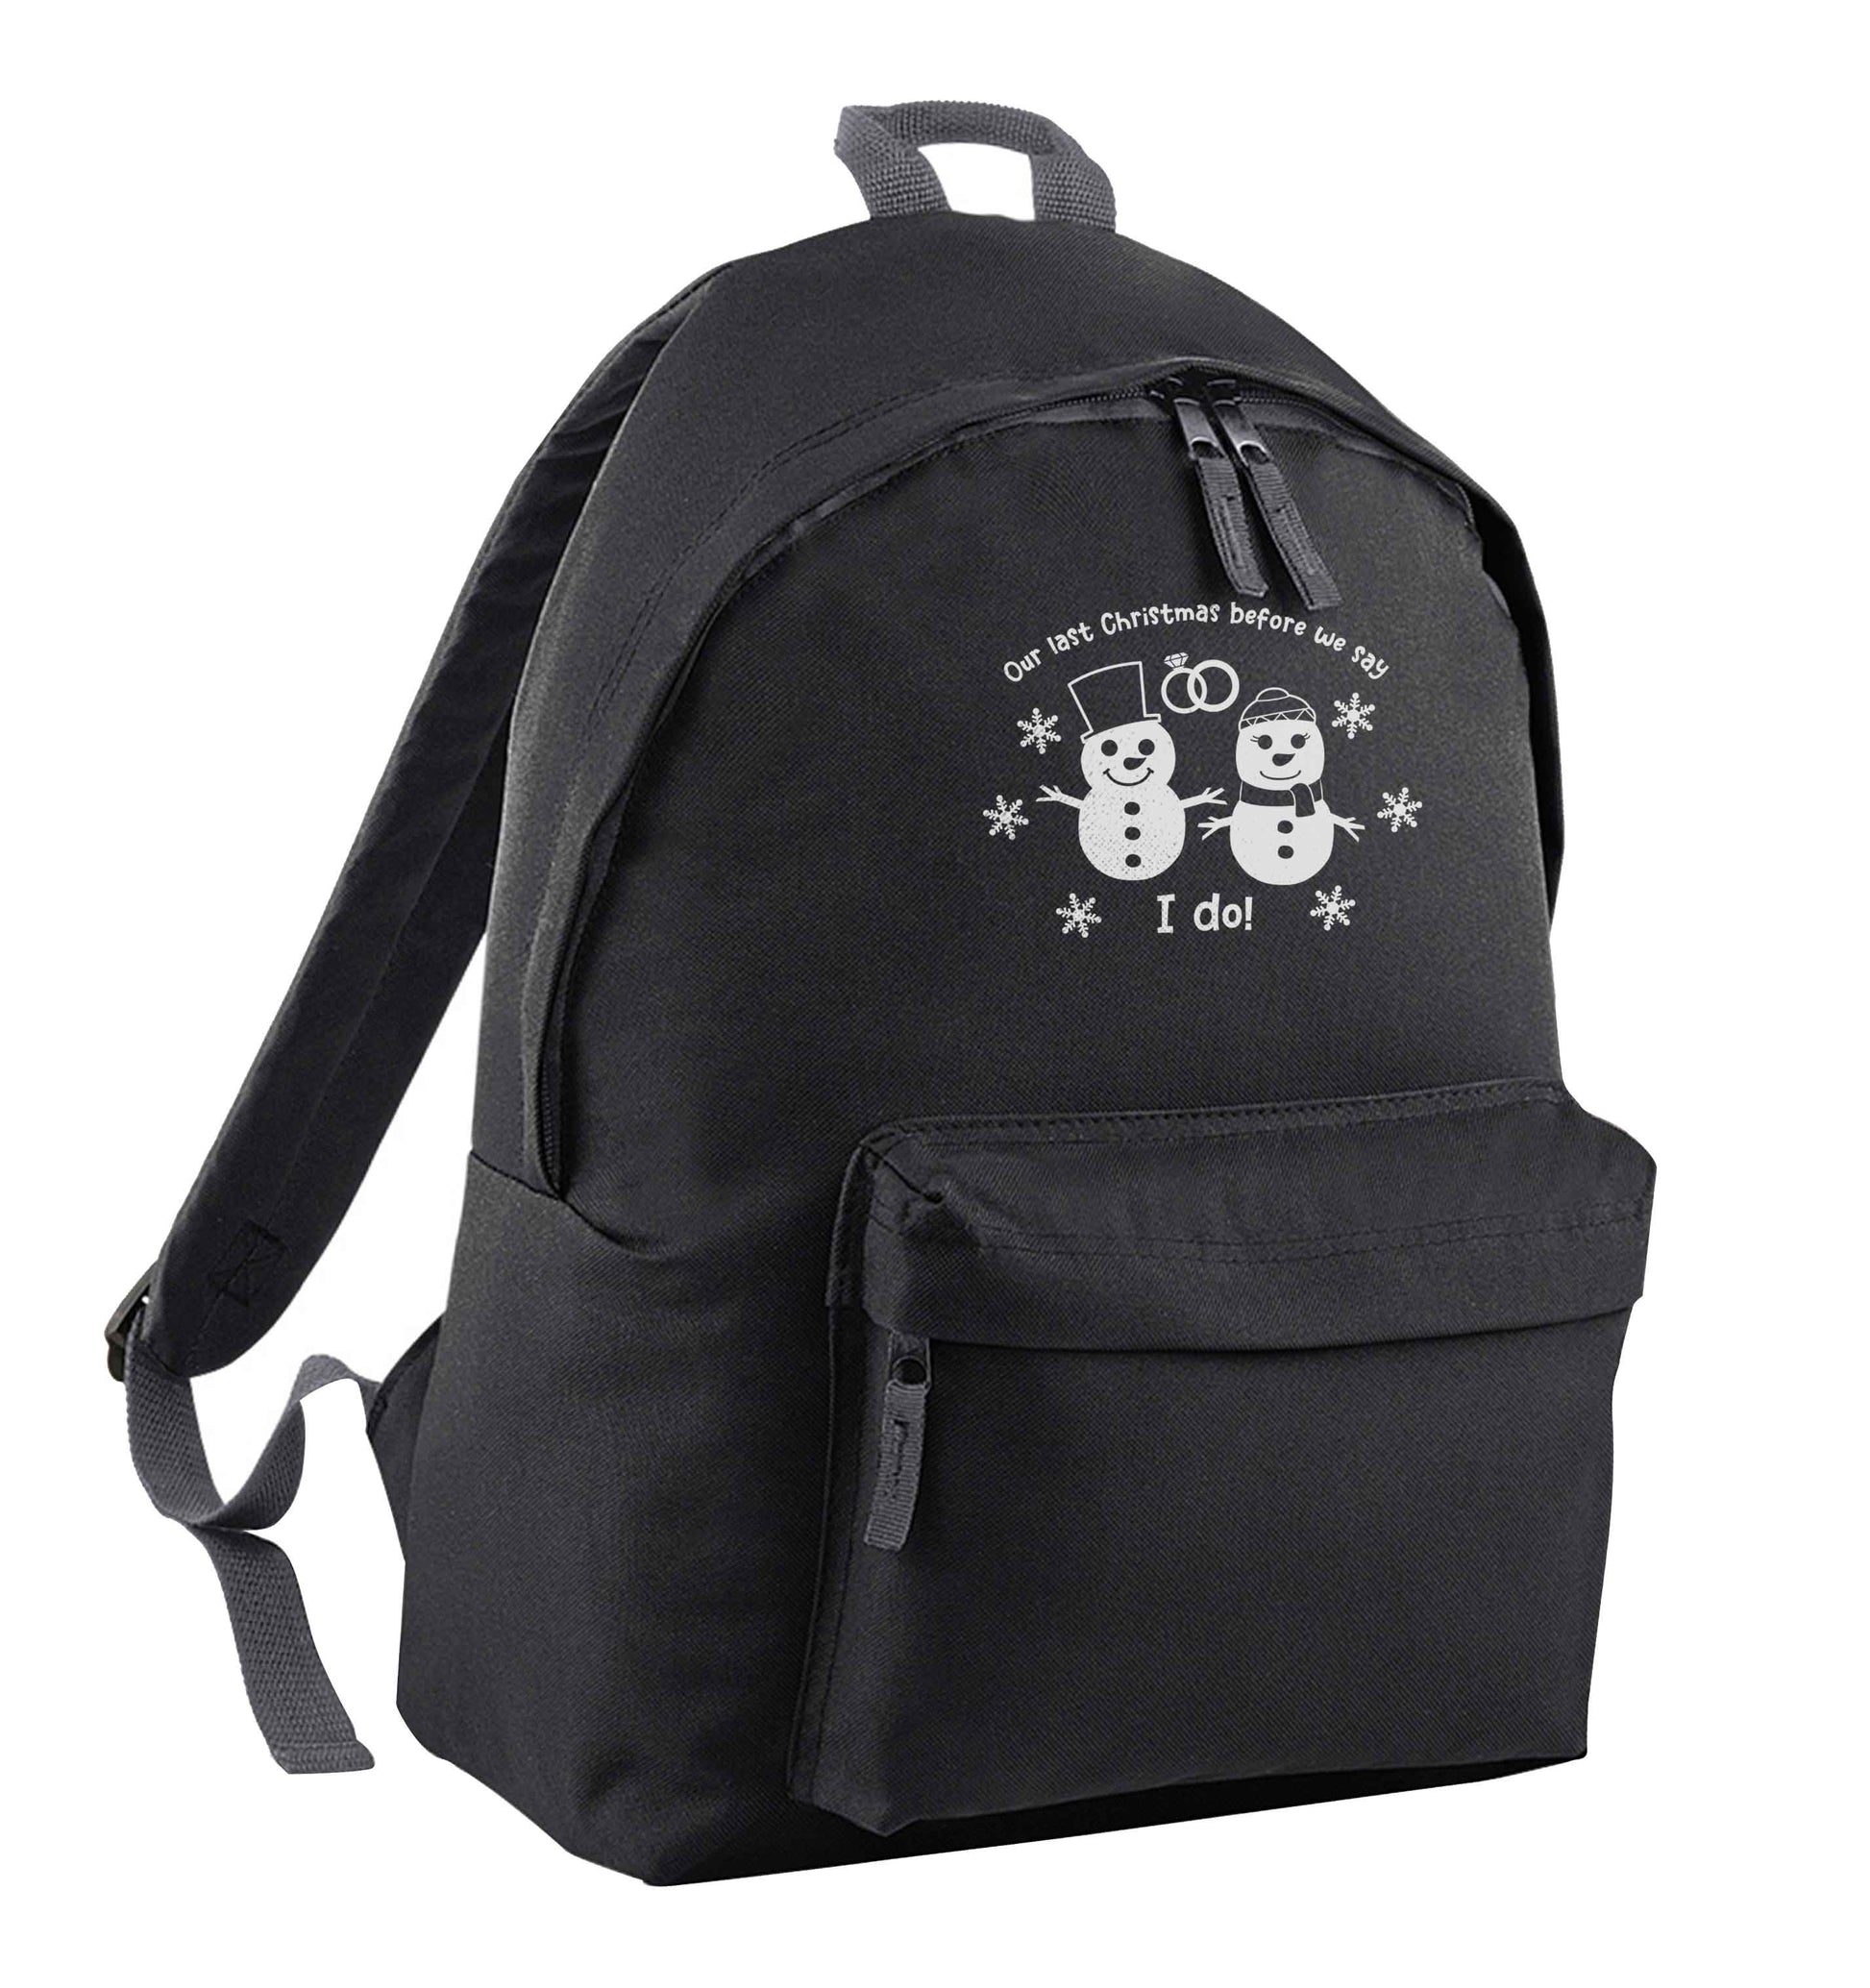 Last Christmas before we say I do black adults backpack